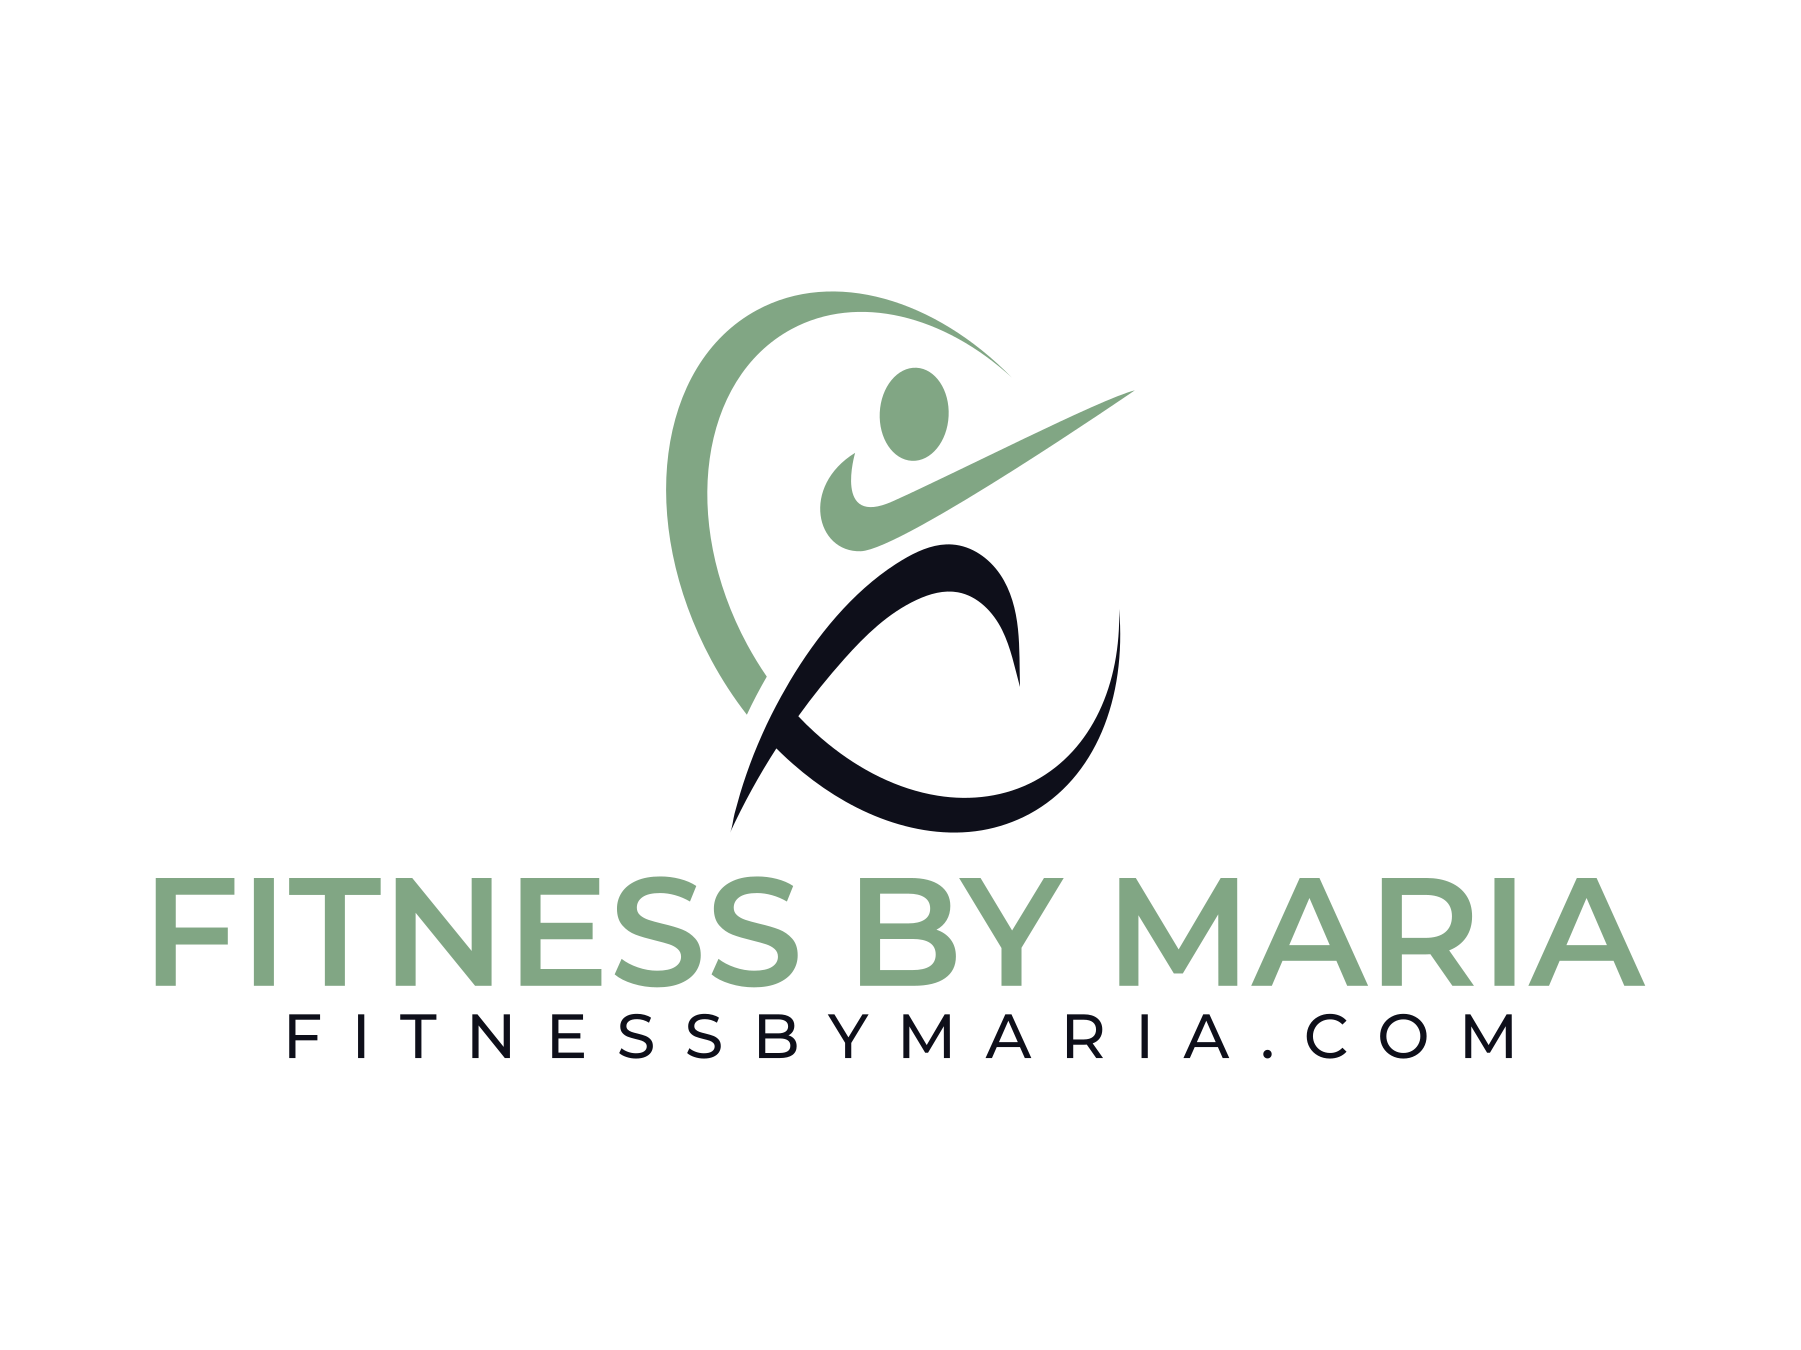 Fitness by Maria